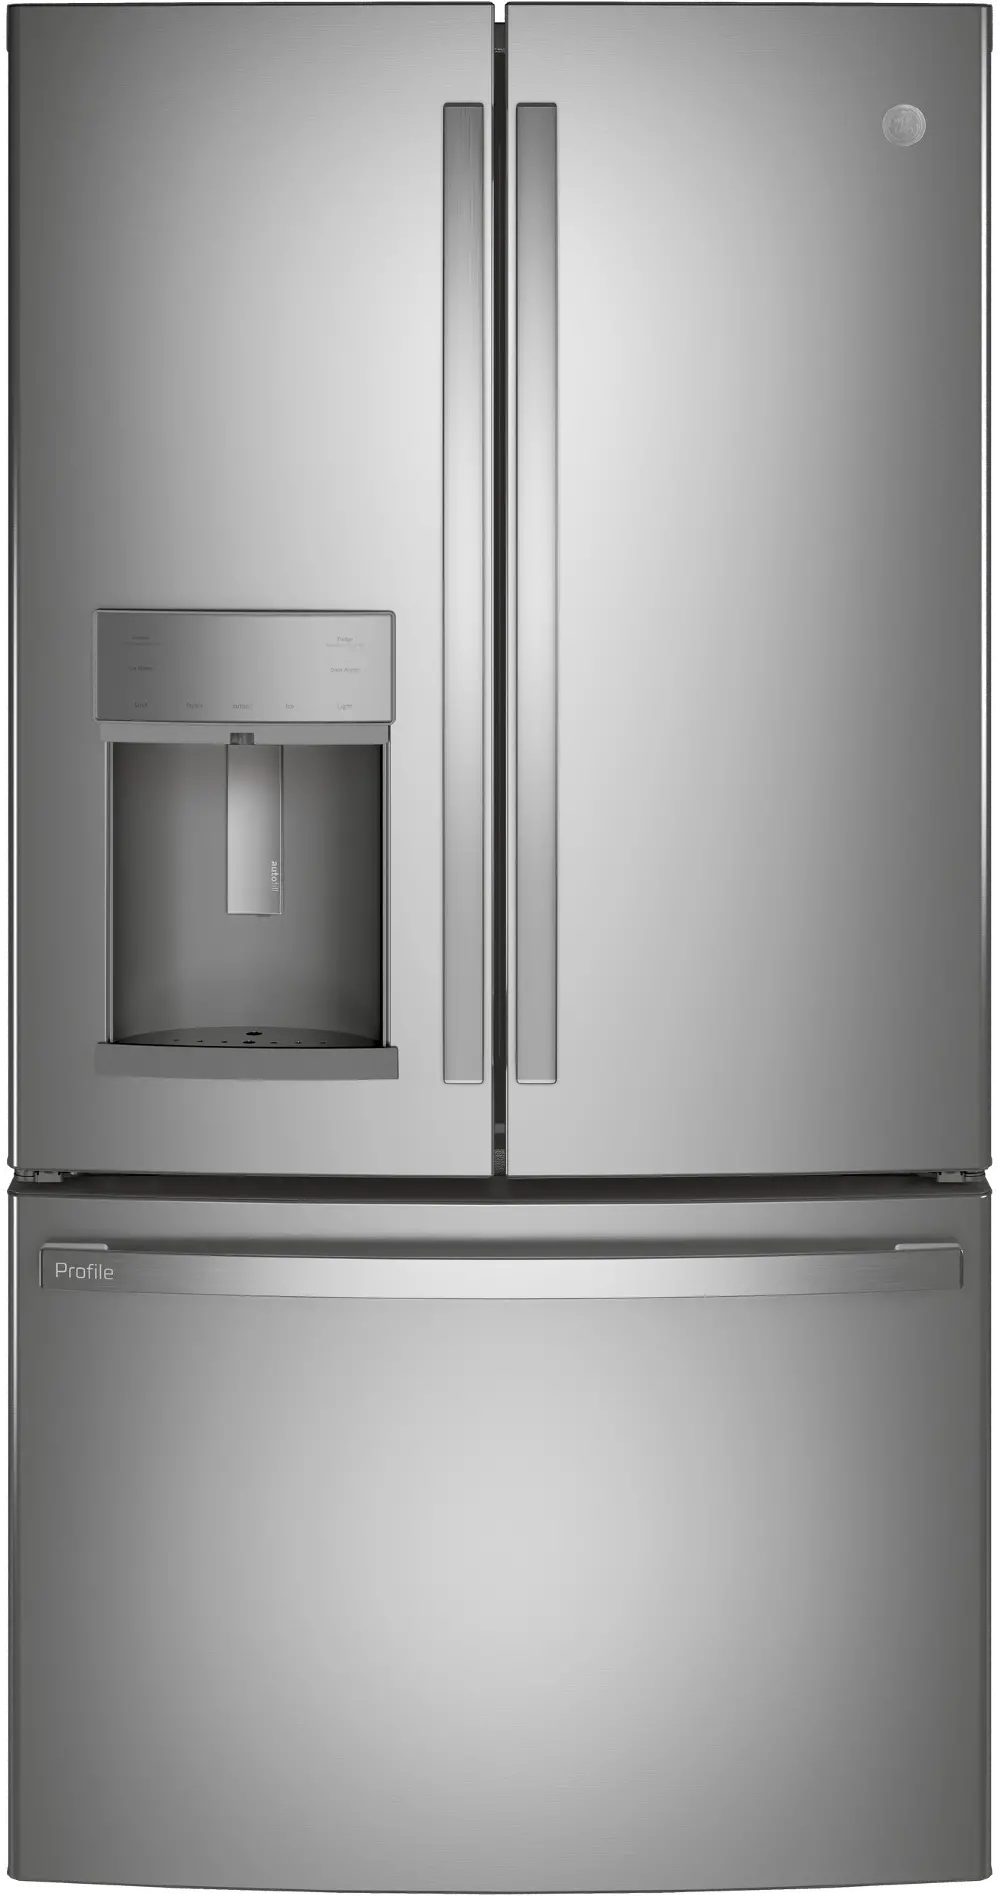 PFE28KYNFS GE Profile 27.8 cu ft French Door Refrigerator - Stainless Steel-1